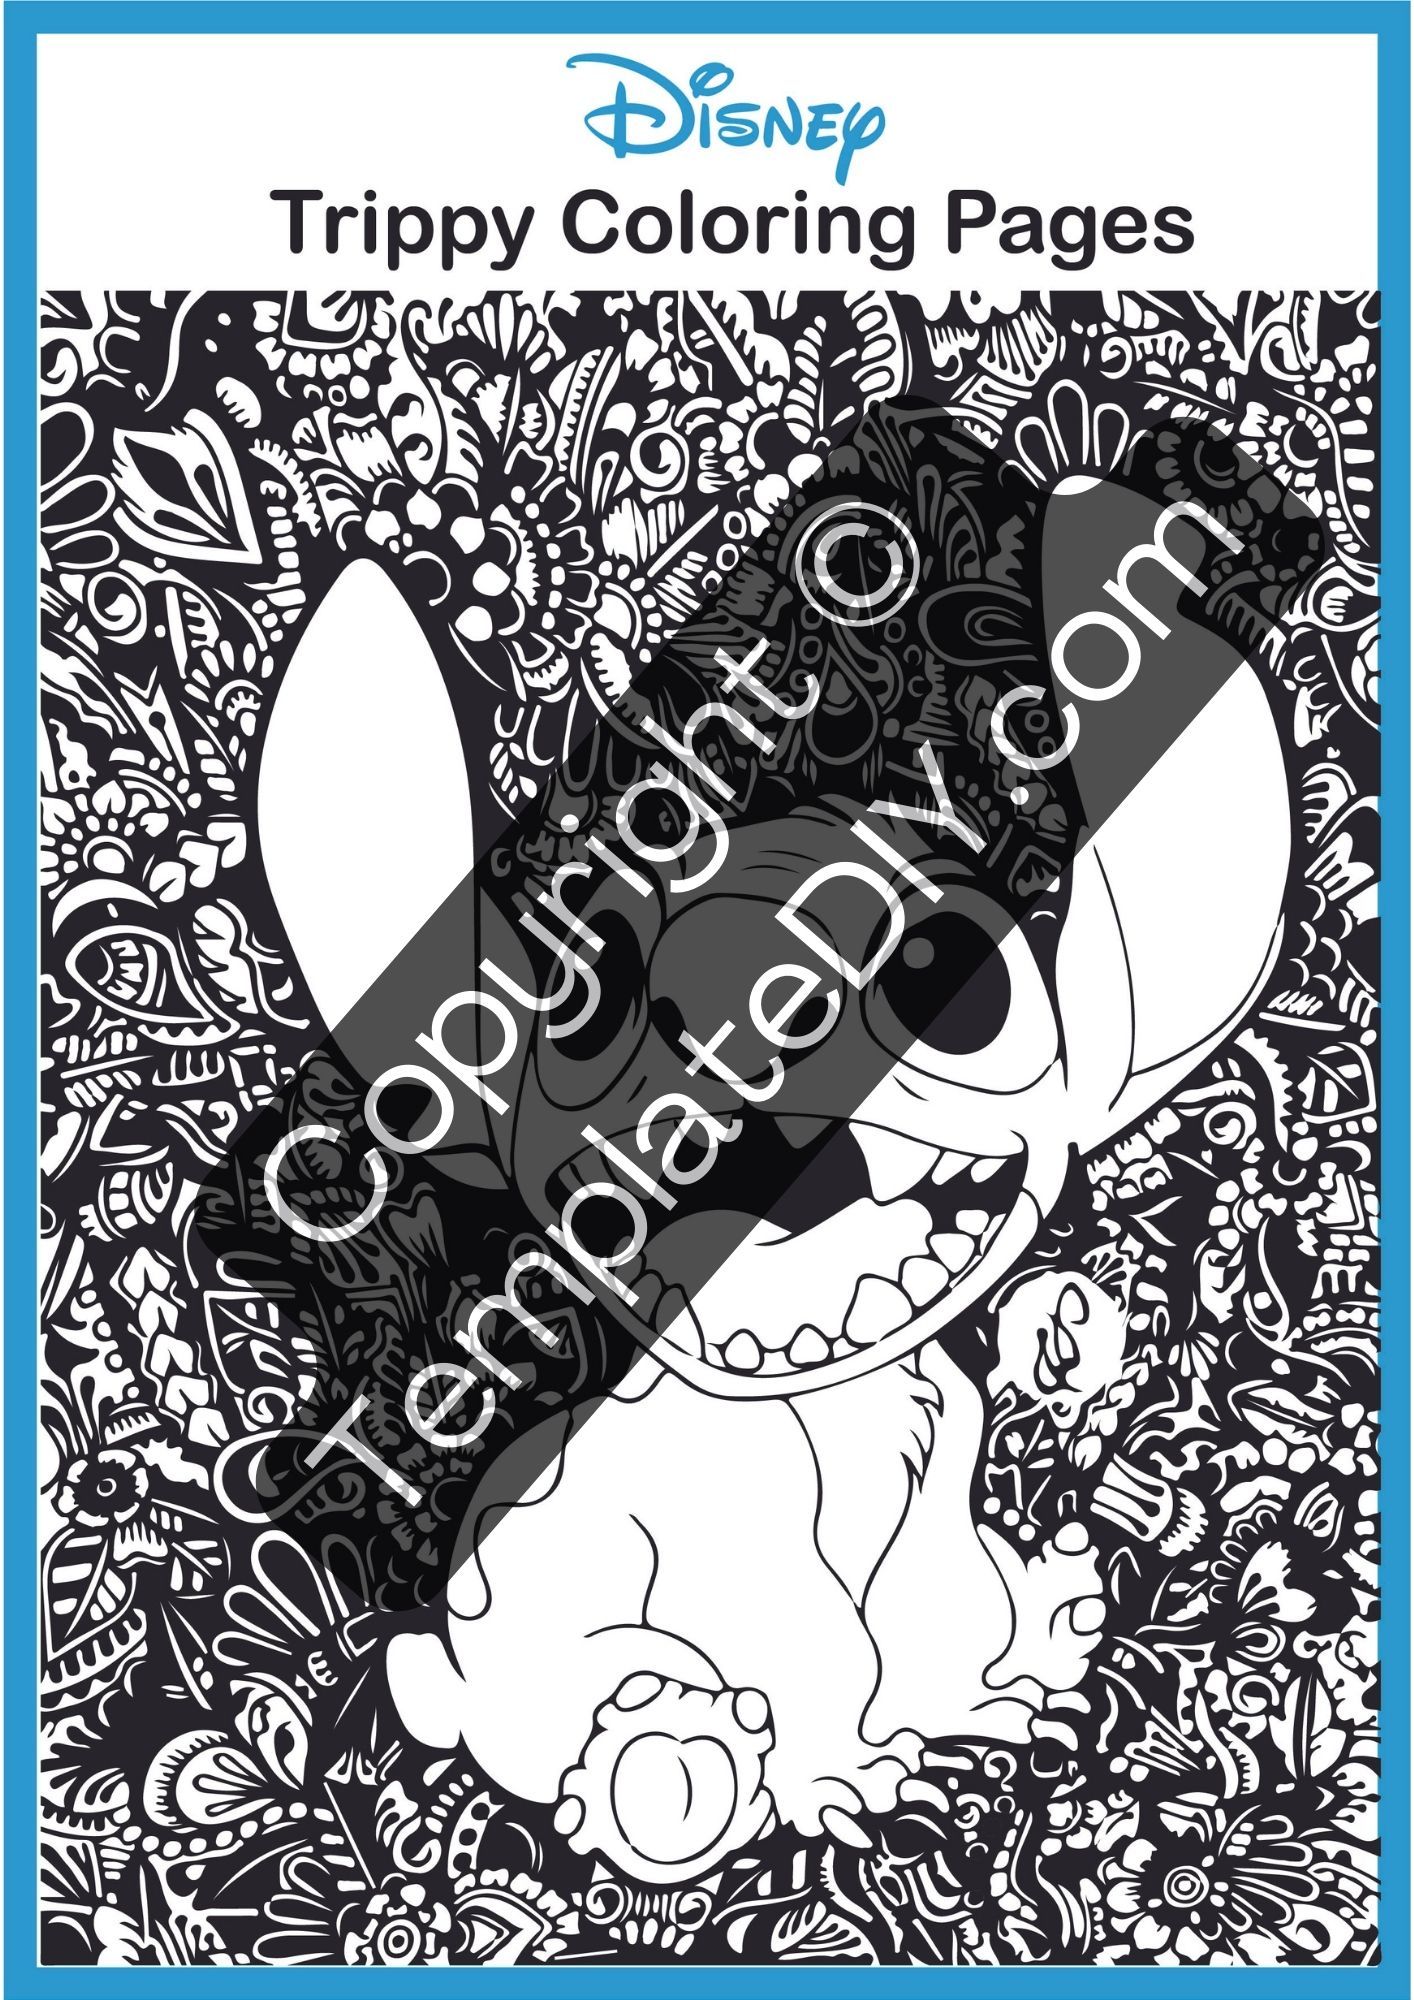 Disney trippy coloring pages printable template in pdf coloring pages trippy disney coloring pages